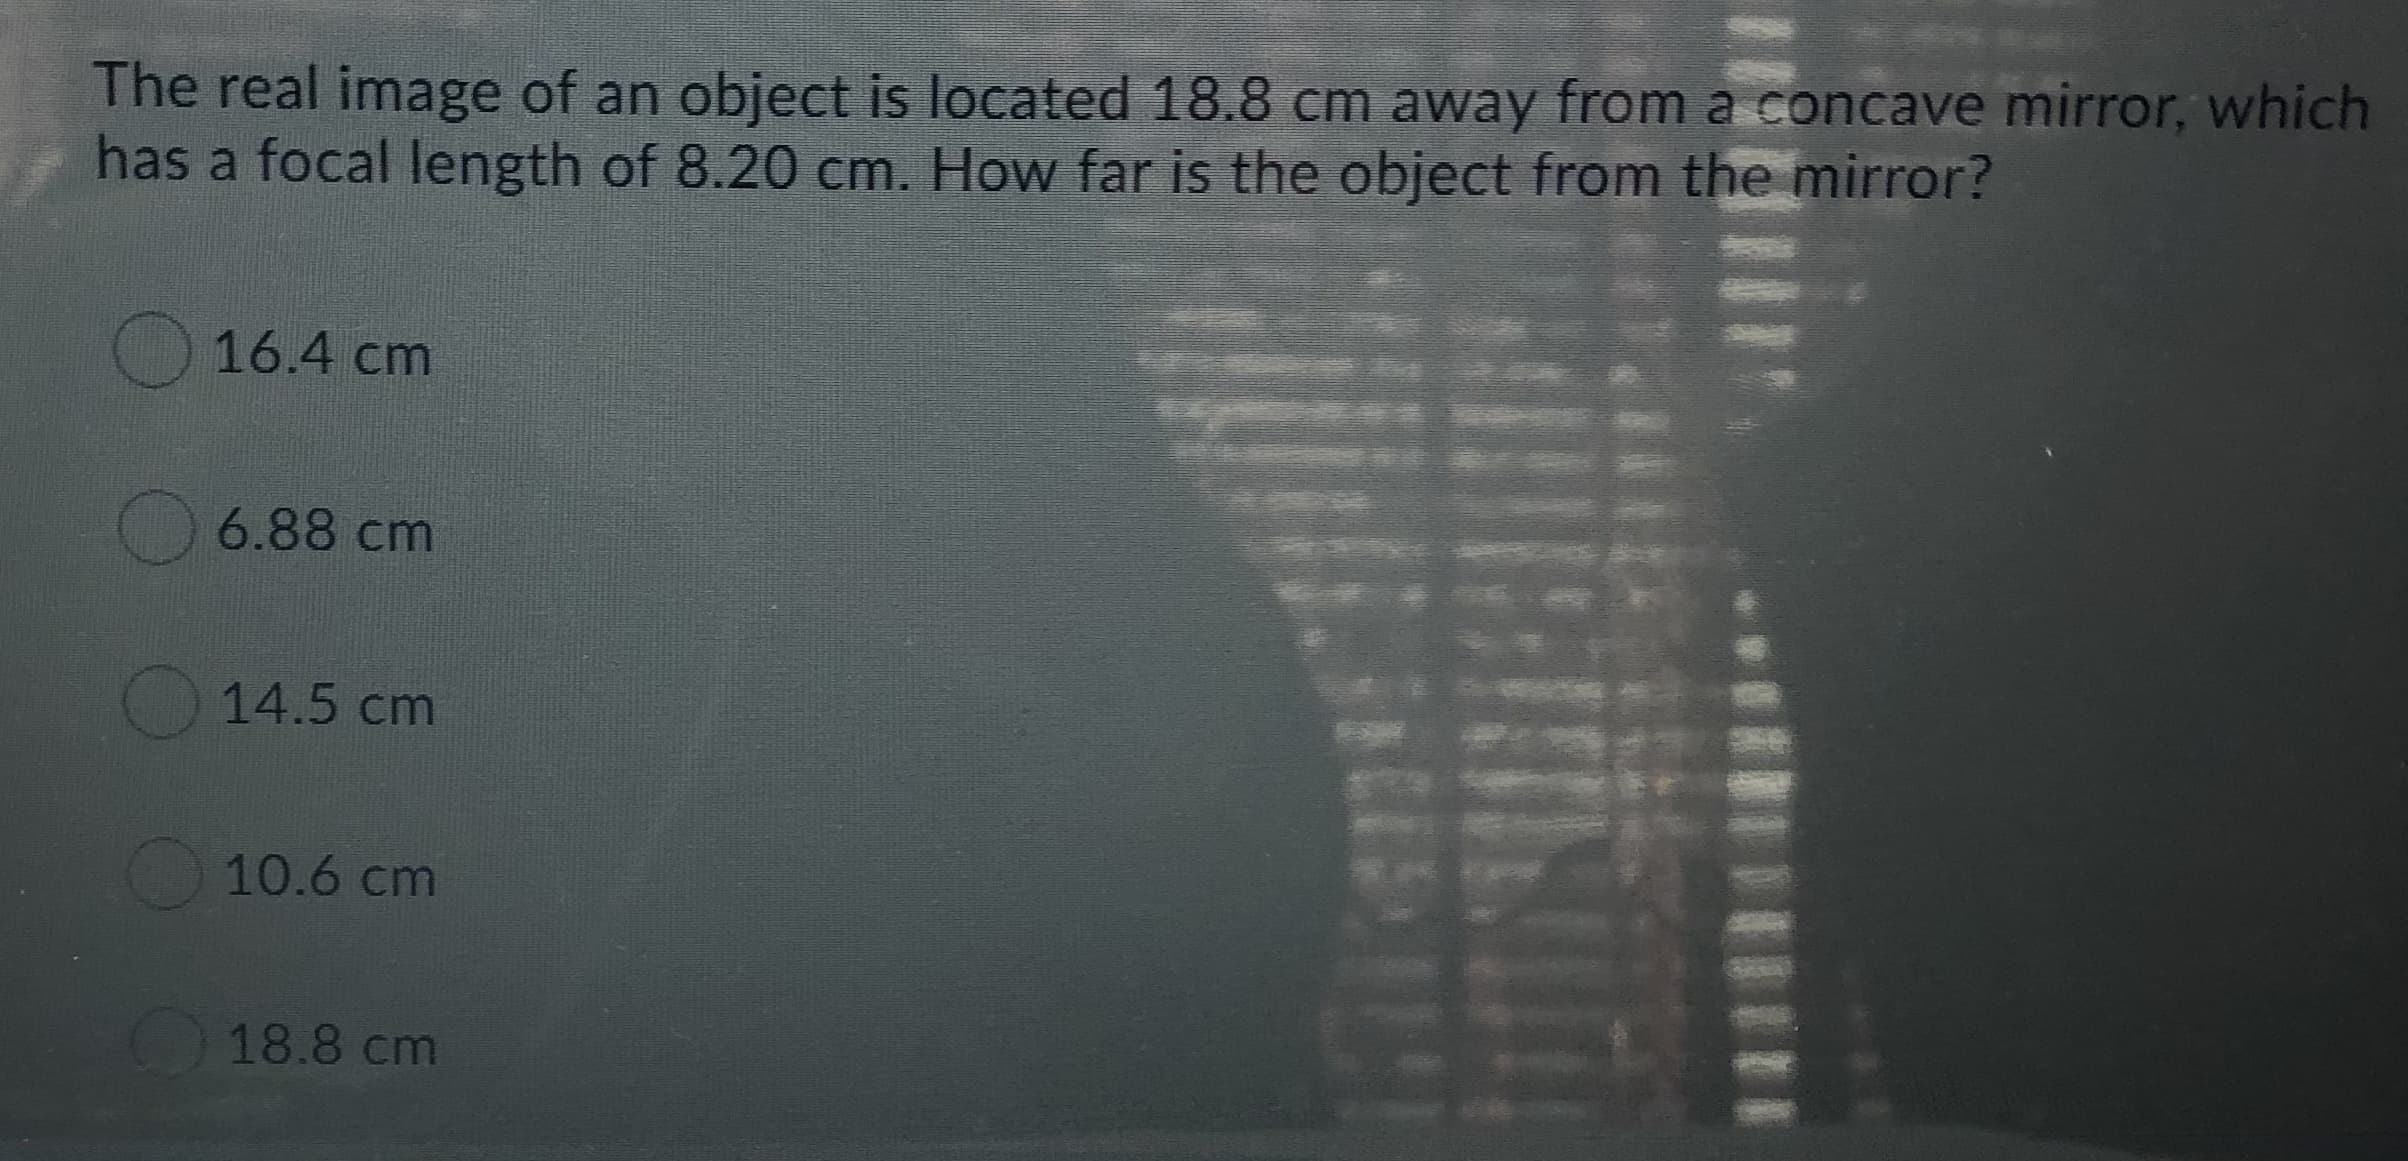 The real image of an object is located 18.8 cm away from a concave mirror, which
has a focal length of 8.20 cm. How far is the object from the mirror?
16.4 cm
6.88 cm
14.5 cm
10.6 cm
18.8 cm
